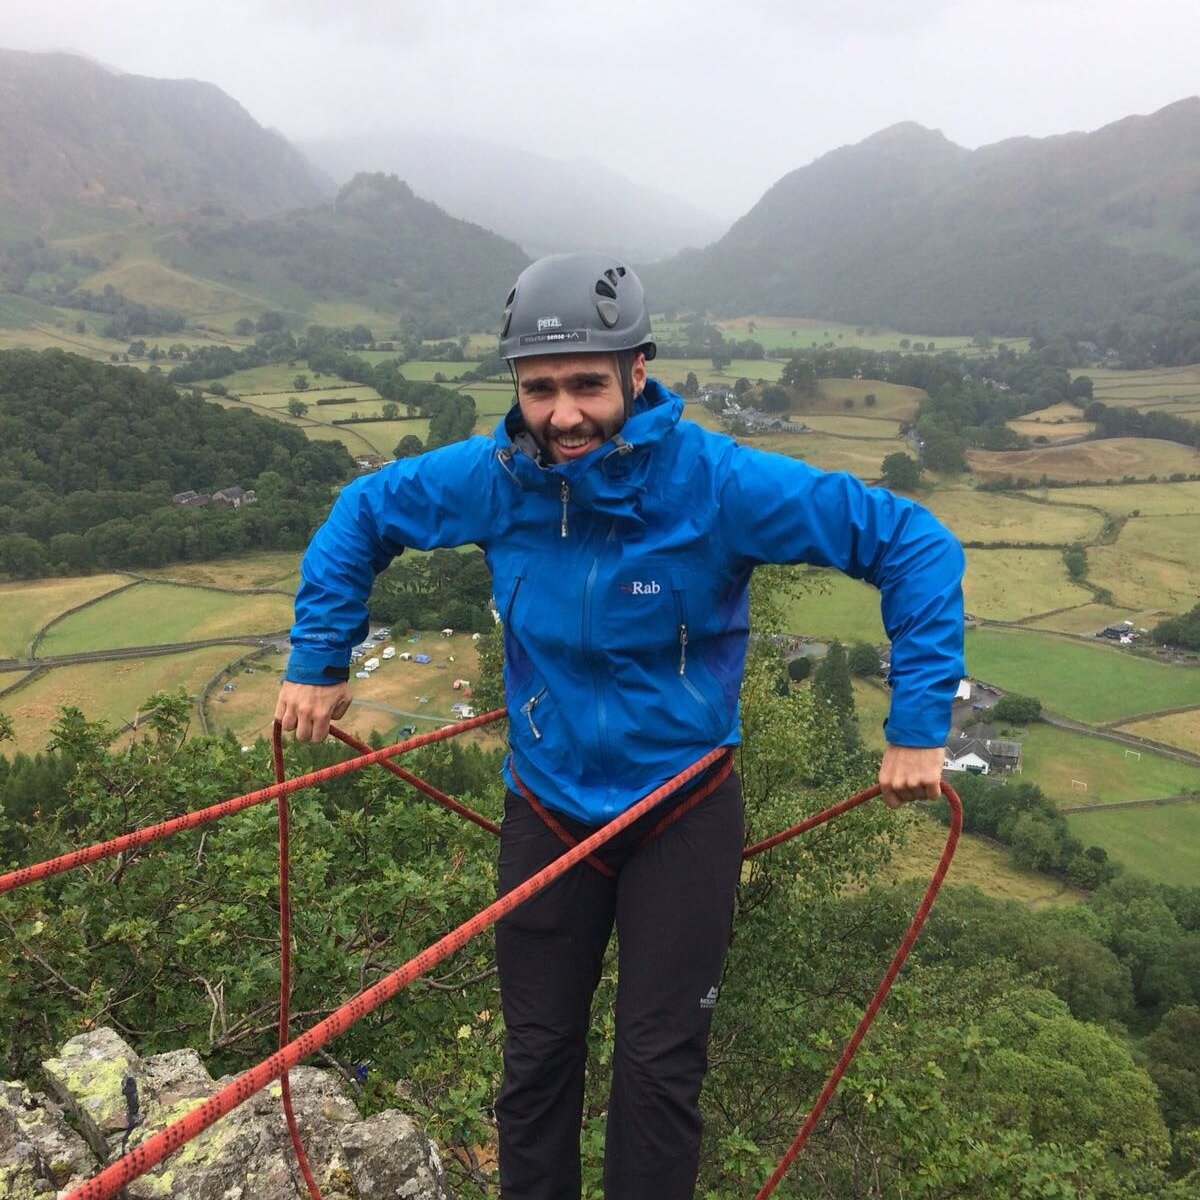 Mastering the 'South African Abseil' during last week's mountain skills workshop!

As uncomfortable as it appears, it's a crucial skill for navigating complex terrain when traditional rock climbing gear isn't an option. Stay safe and adaptable! ⛰️

 